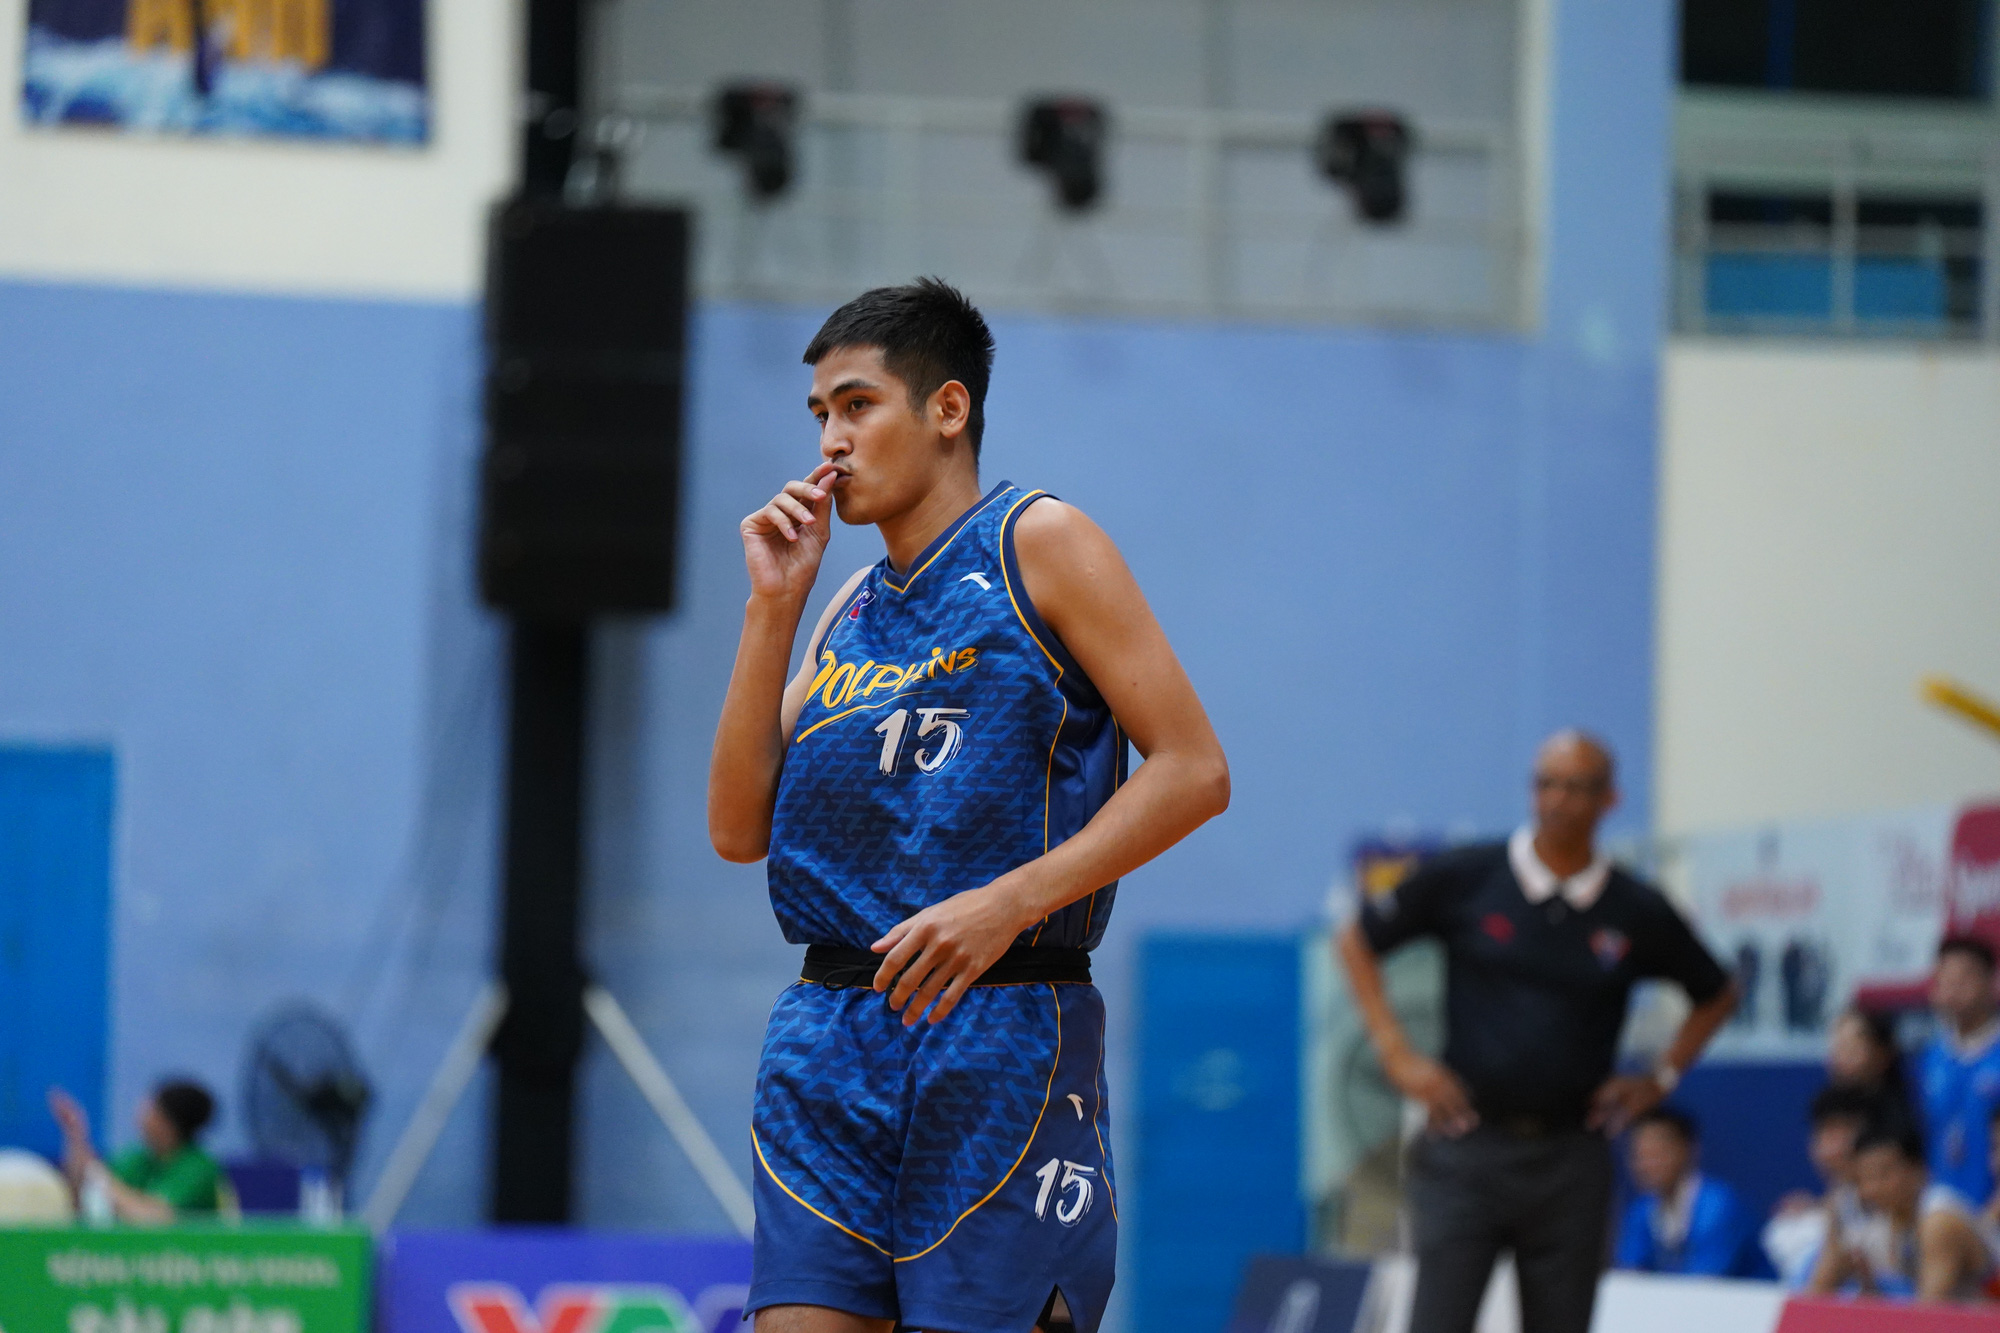 Son Minh Tam is in high form at the 2023 VBA. Photo: VBA